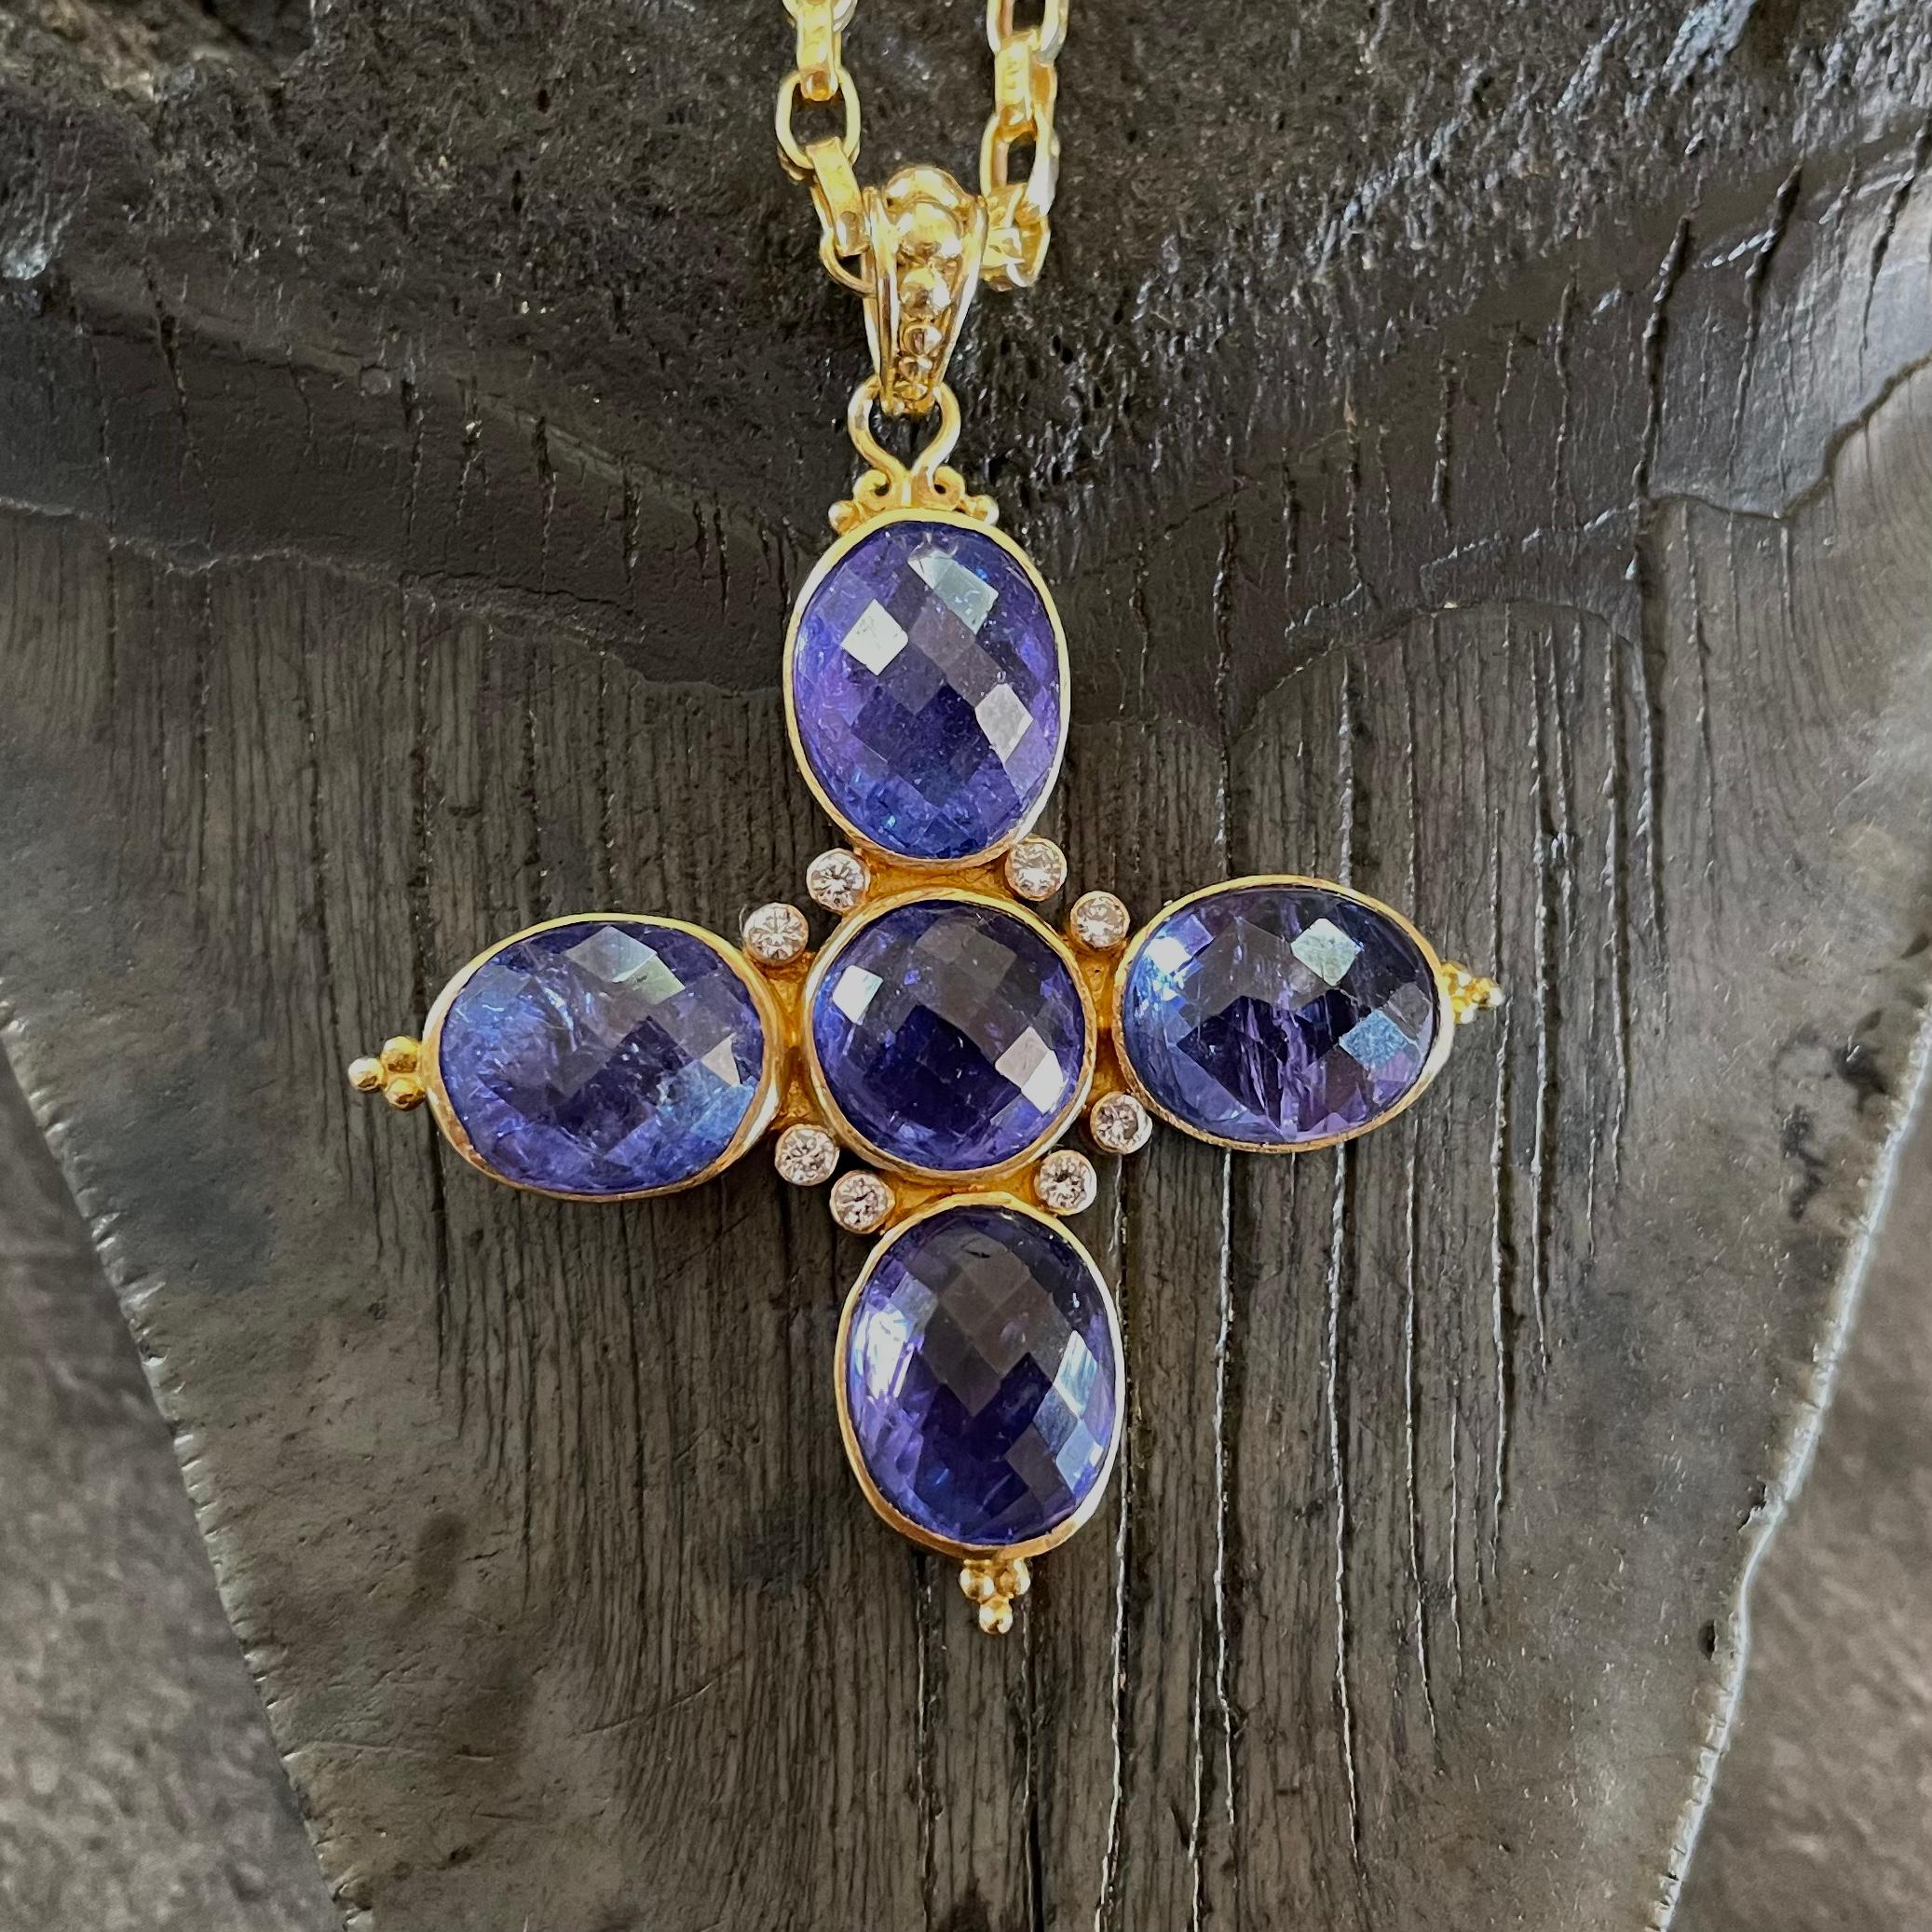 A central 8 mm round rose-cut Tanzanite is surrounded by eight sparkling 1.8mm VS1 diamonds with outstretched 9 x 11 mm oval Tanzanites extending out into a cross.  Granulated 